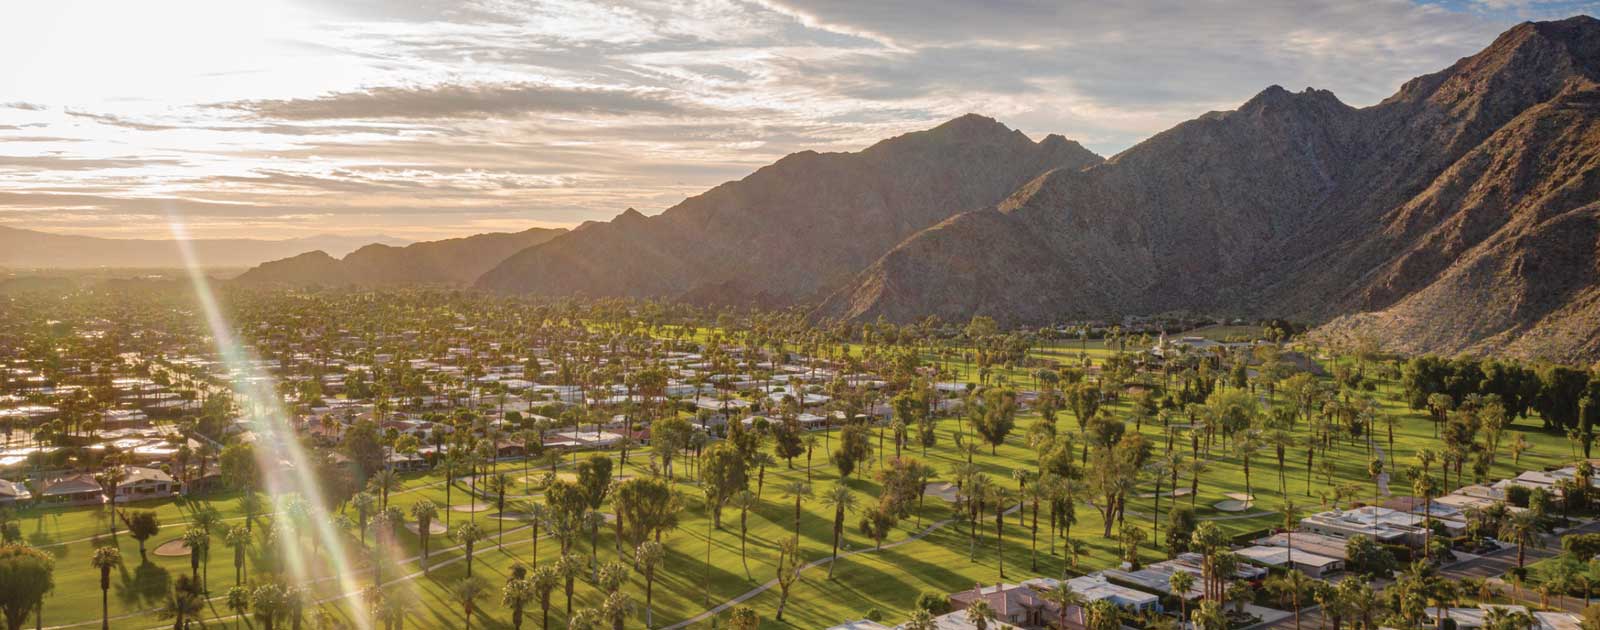 residences in the Coachella Valley with palm trees and mountains